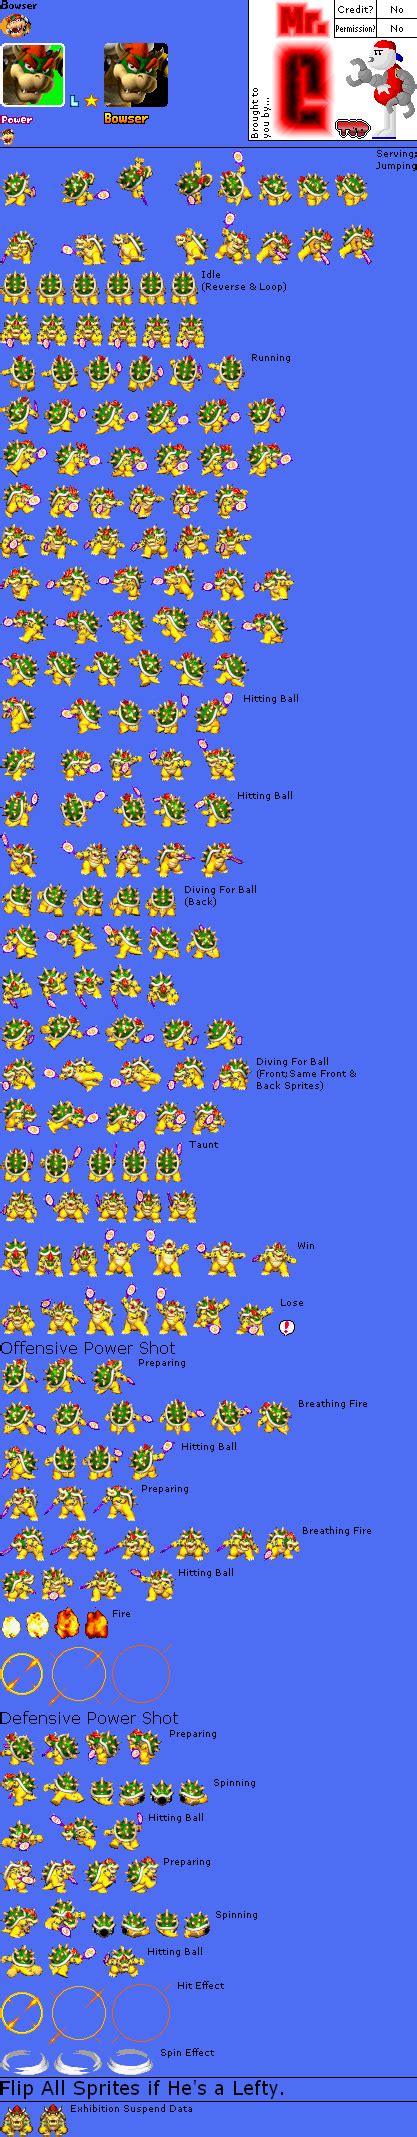 The Spriters Resource Full Sheet View Mario Tennis Power Tour Bowser